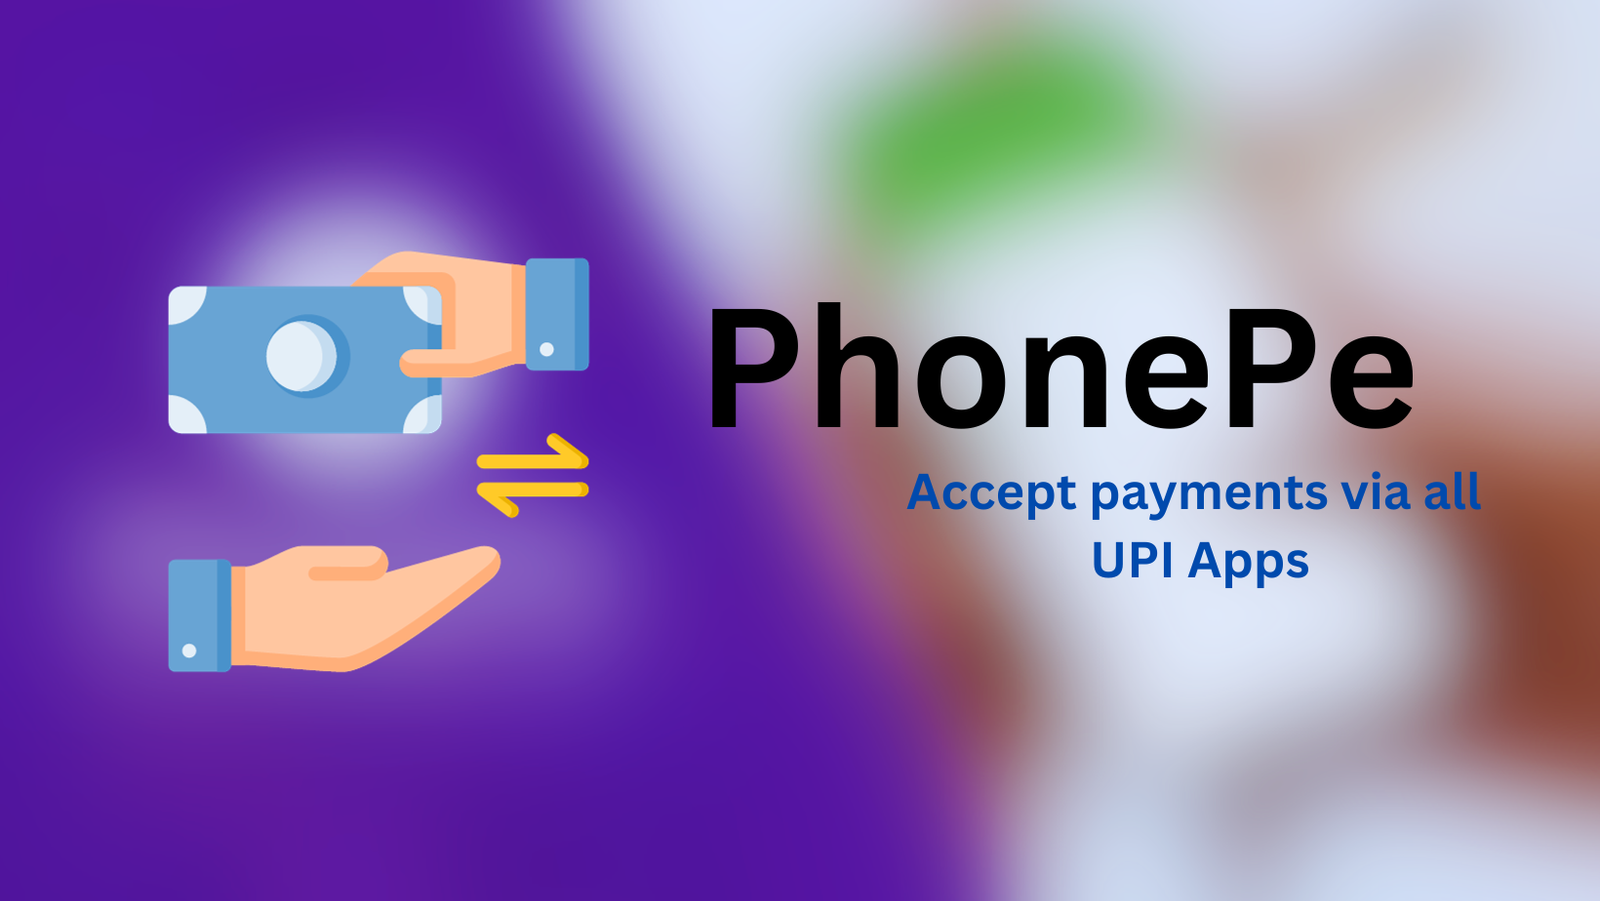 PhonePe App For PC